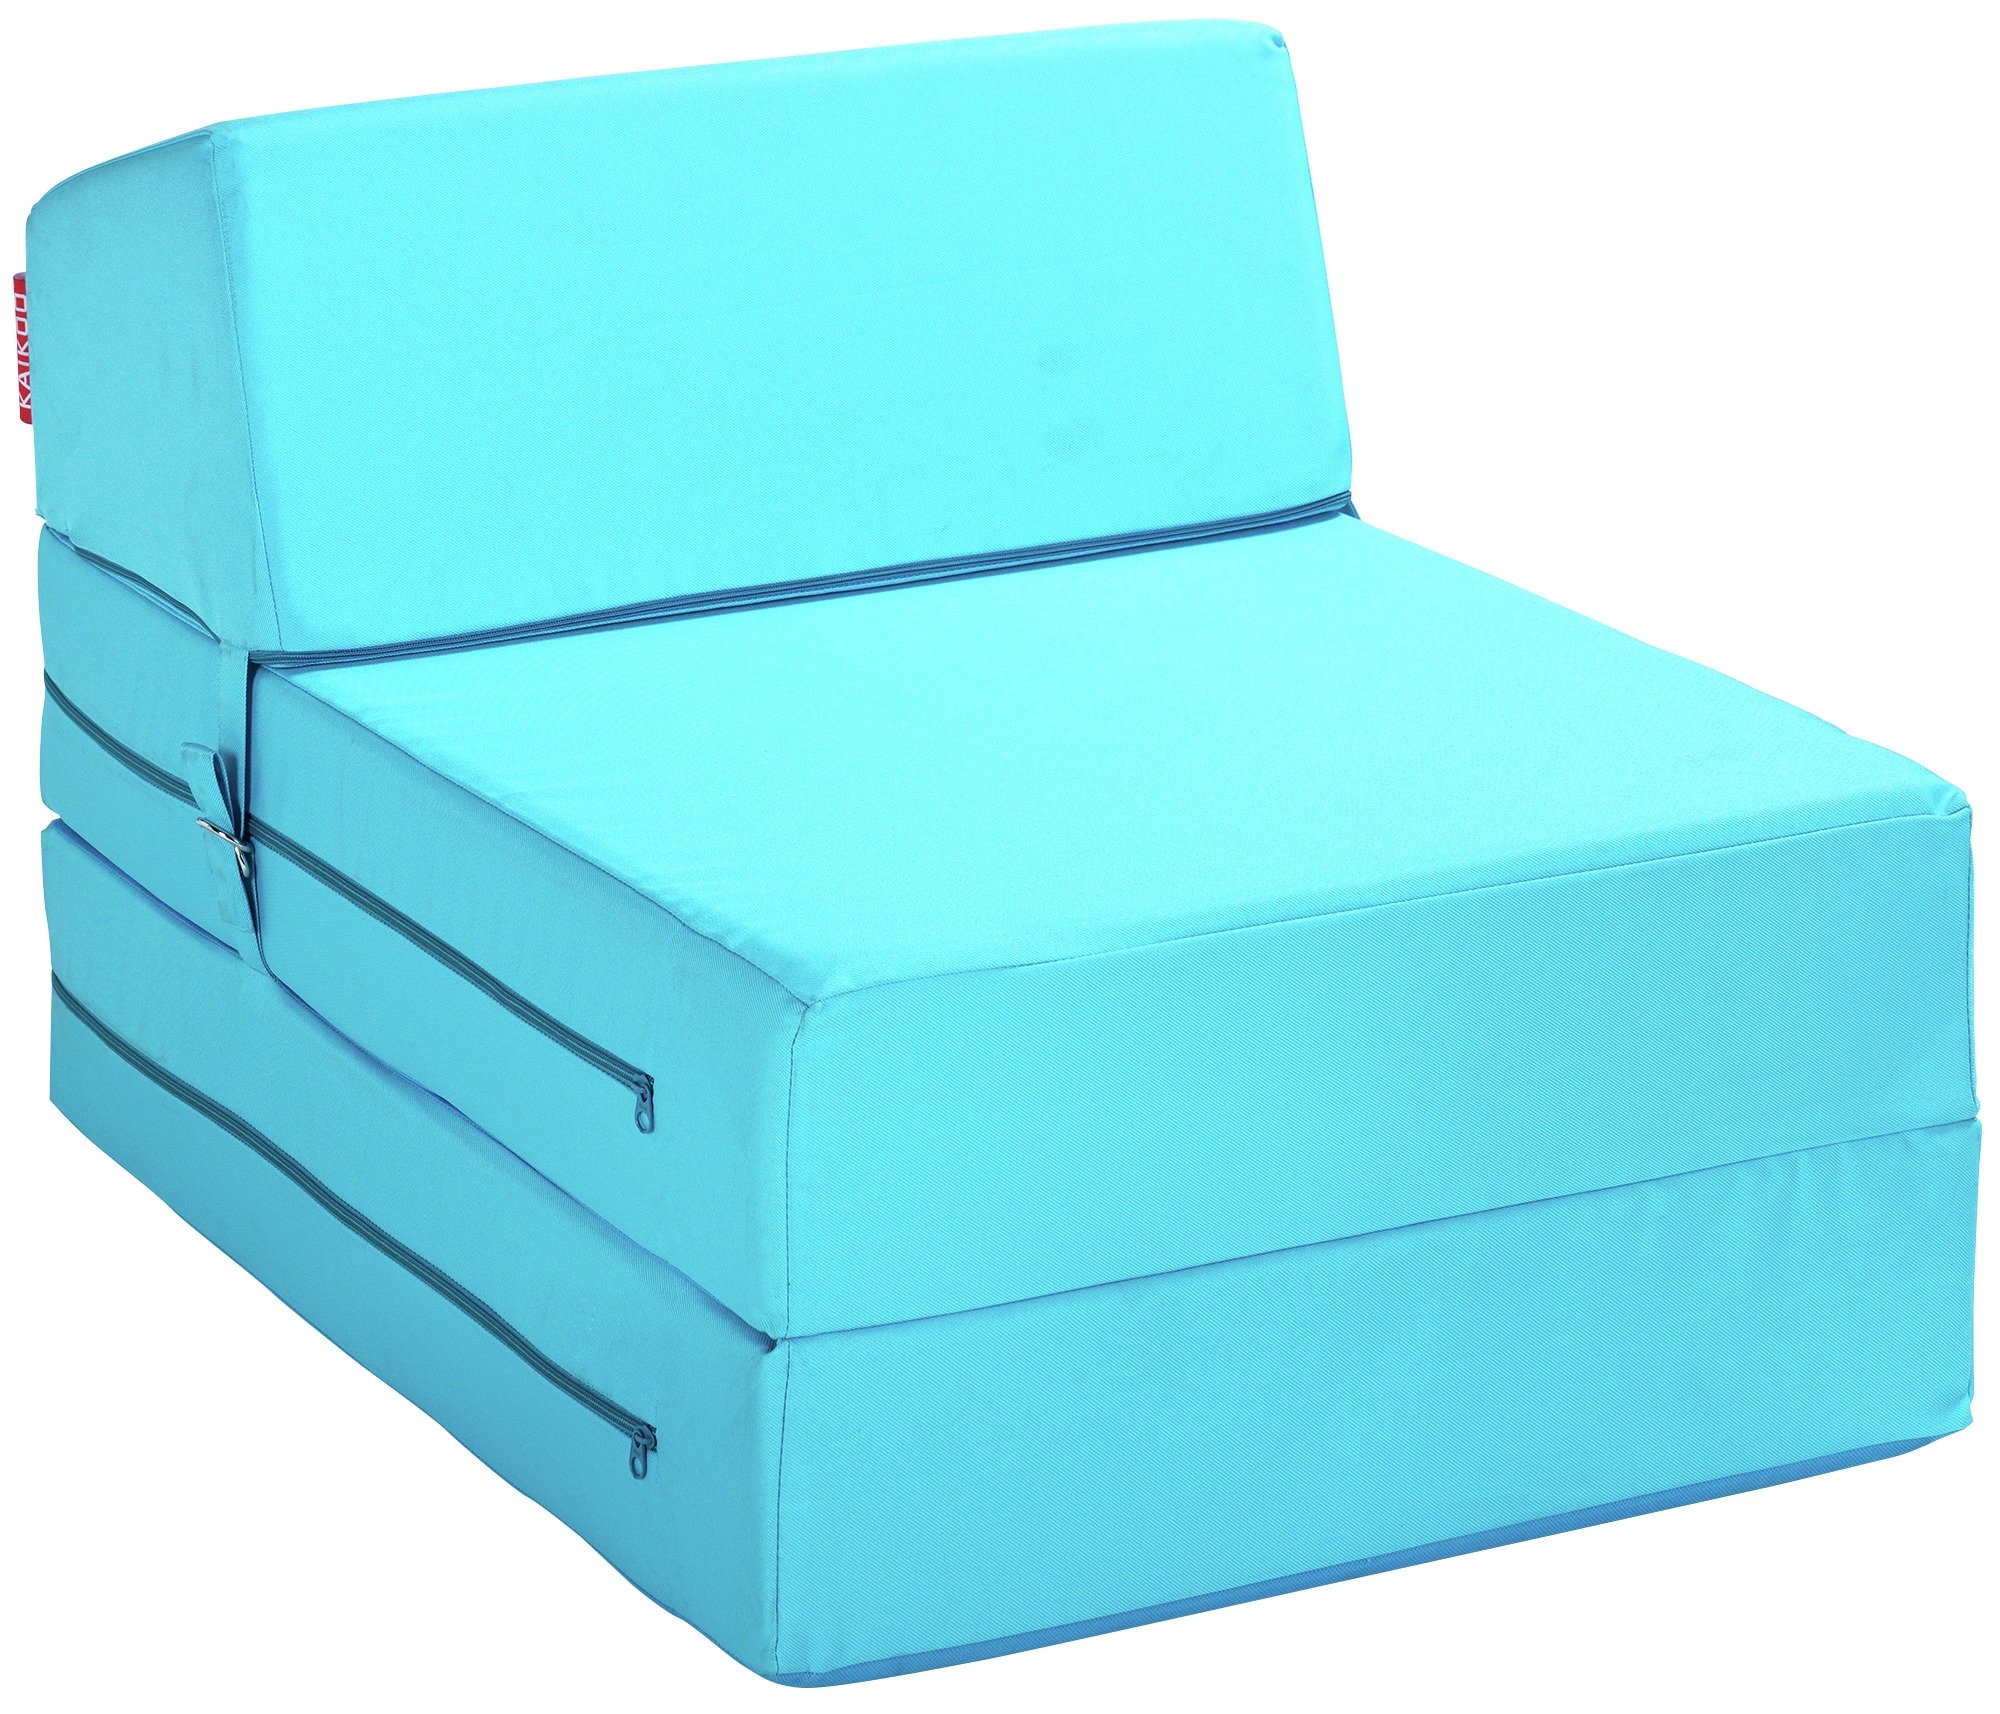 Argos Home Single Chairbed - Crystal Blue